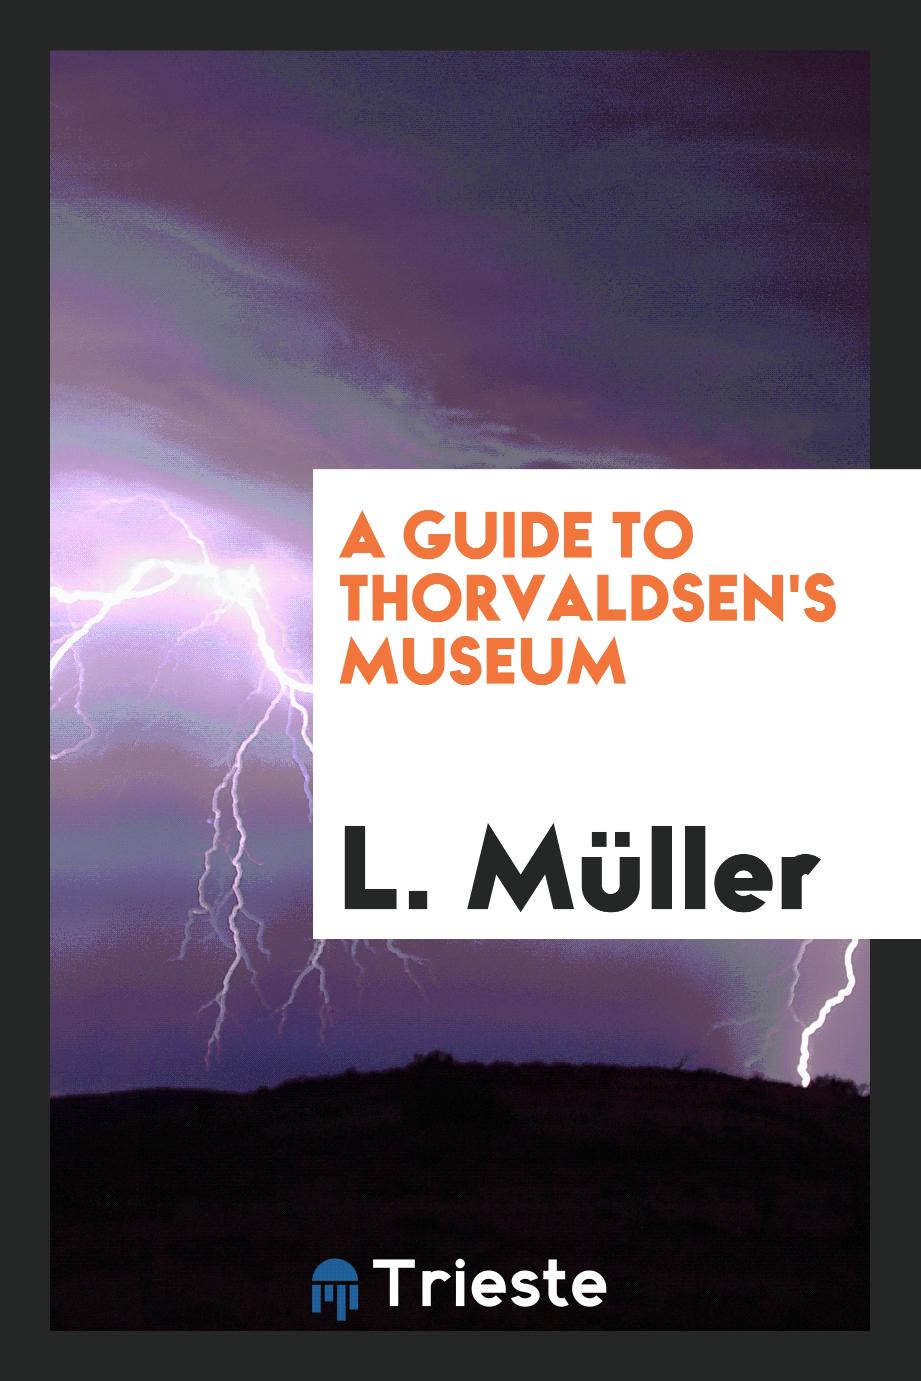 A guide to Thorvaldsen's Museum